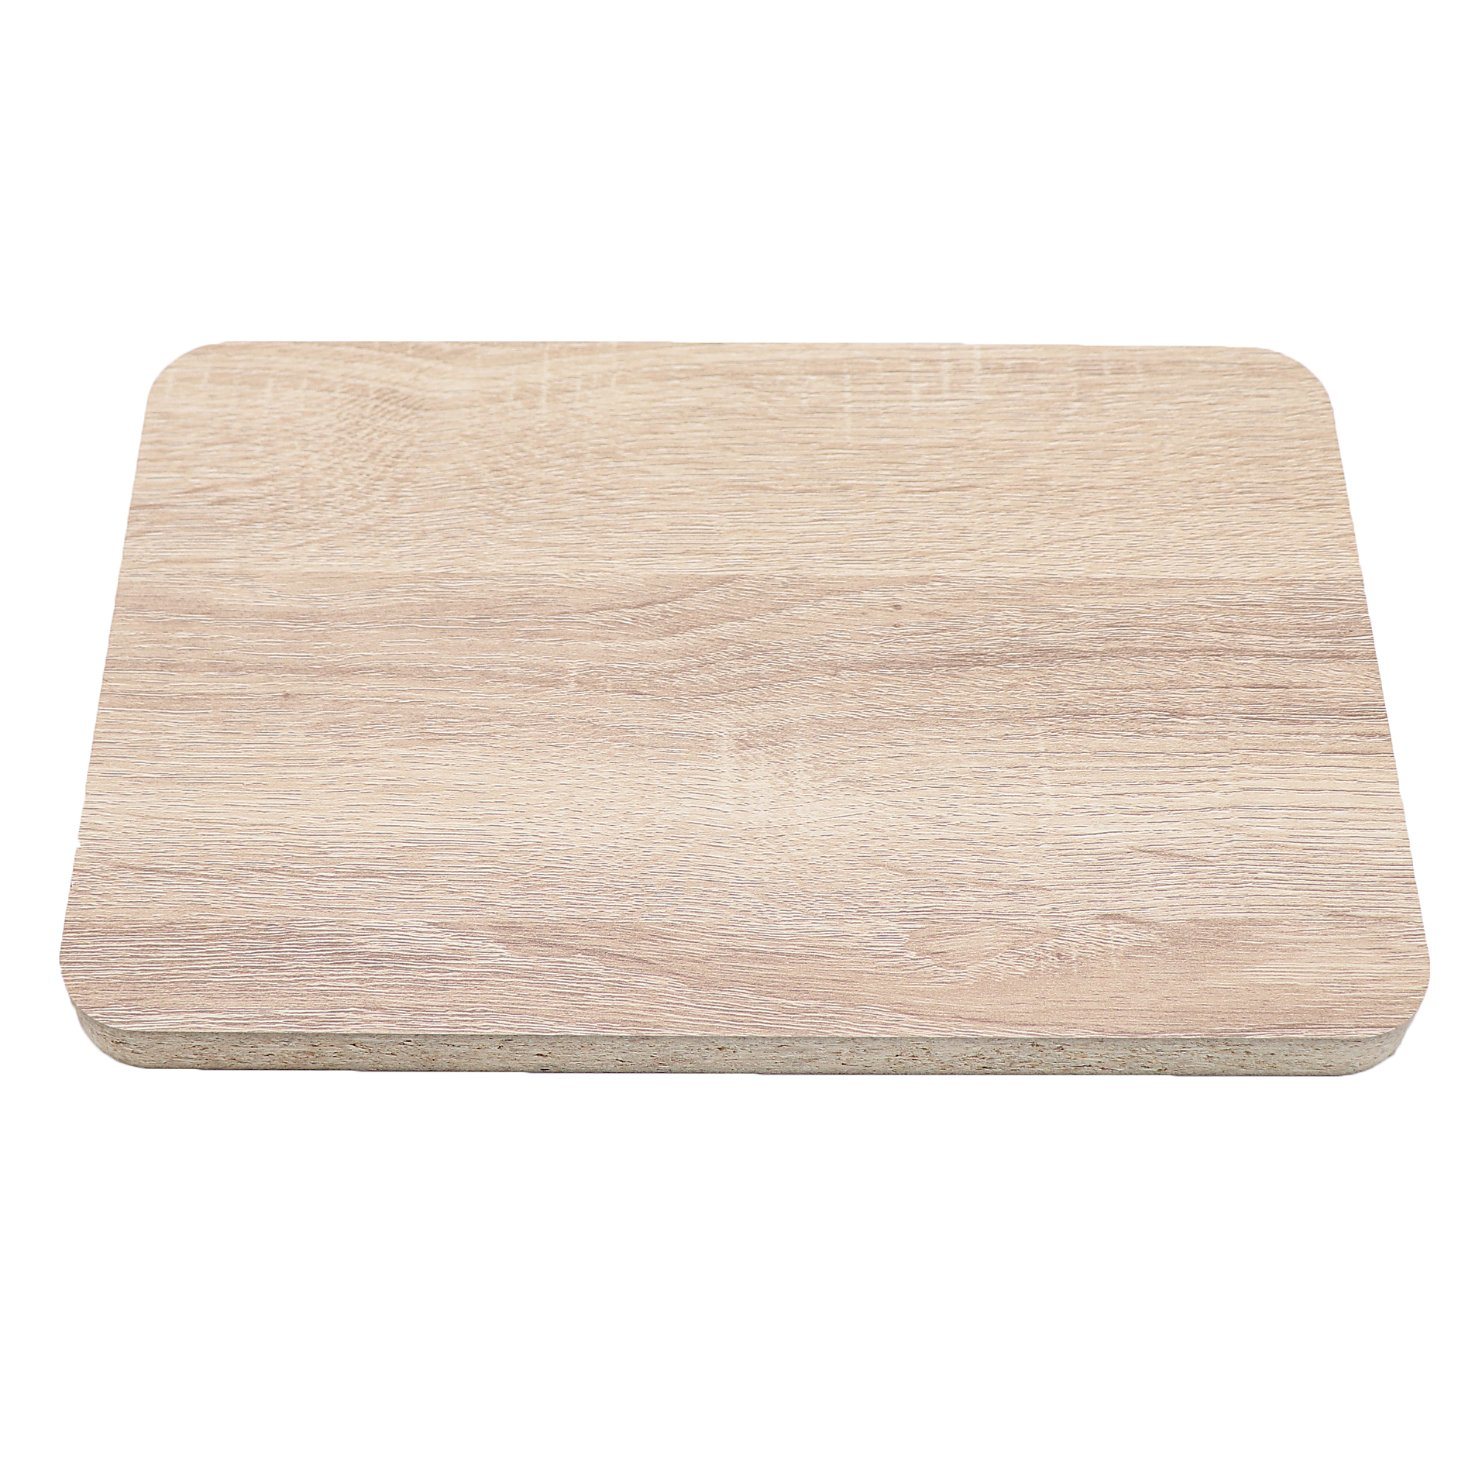 Rough Surface Wood Grain Melamine Chipboard for Furniture